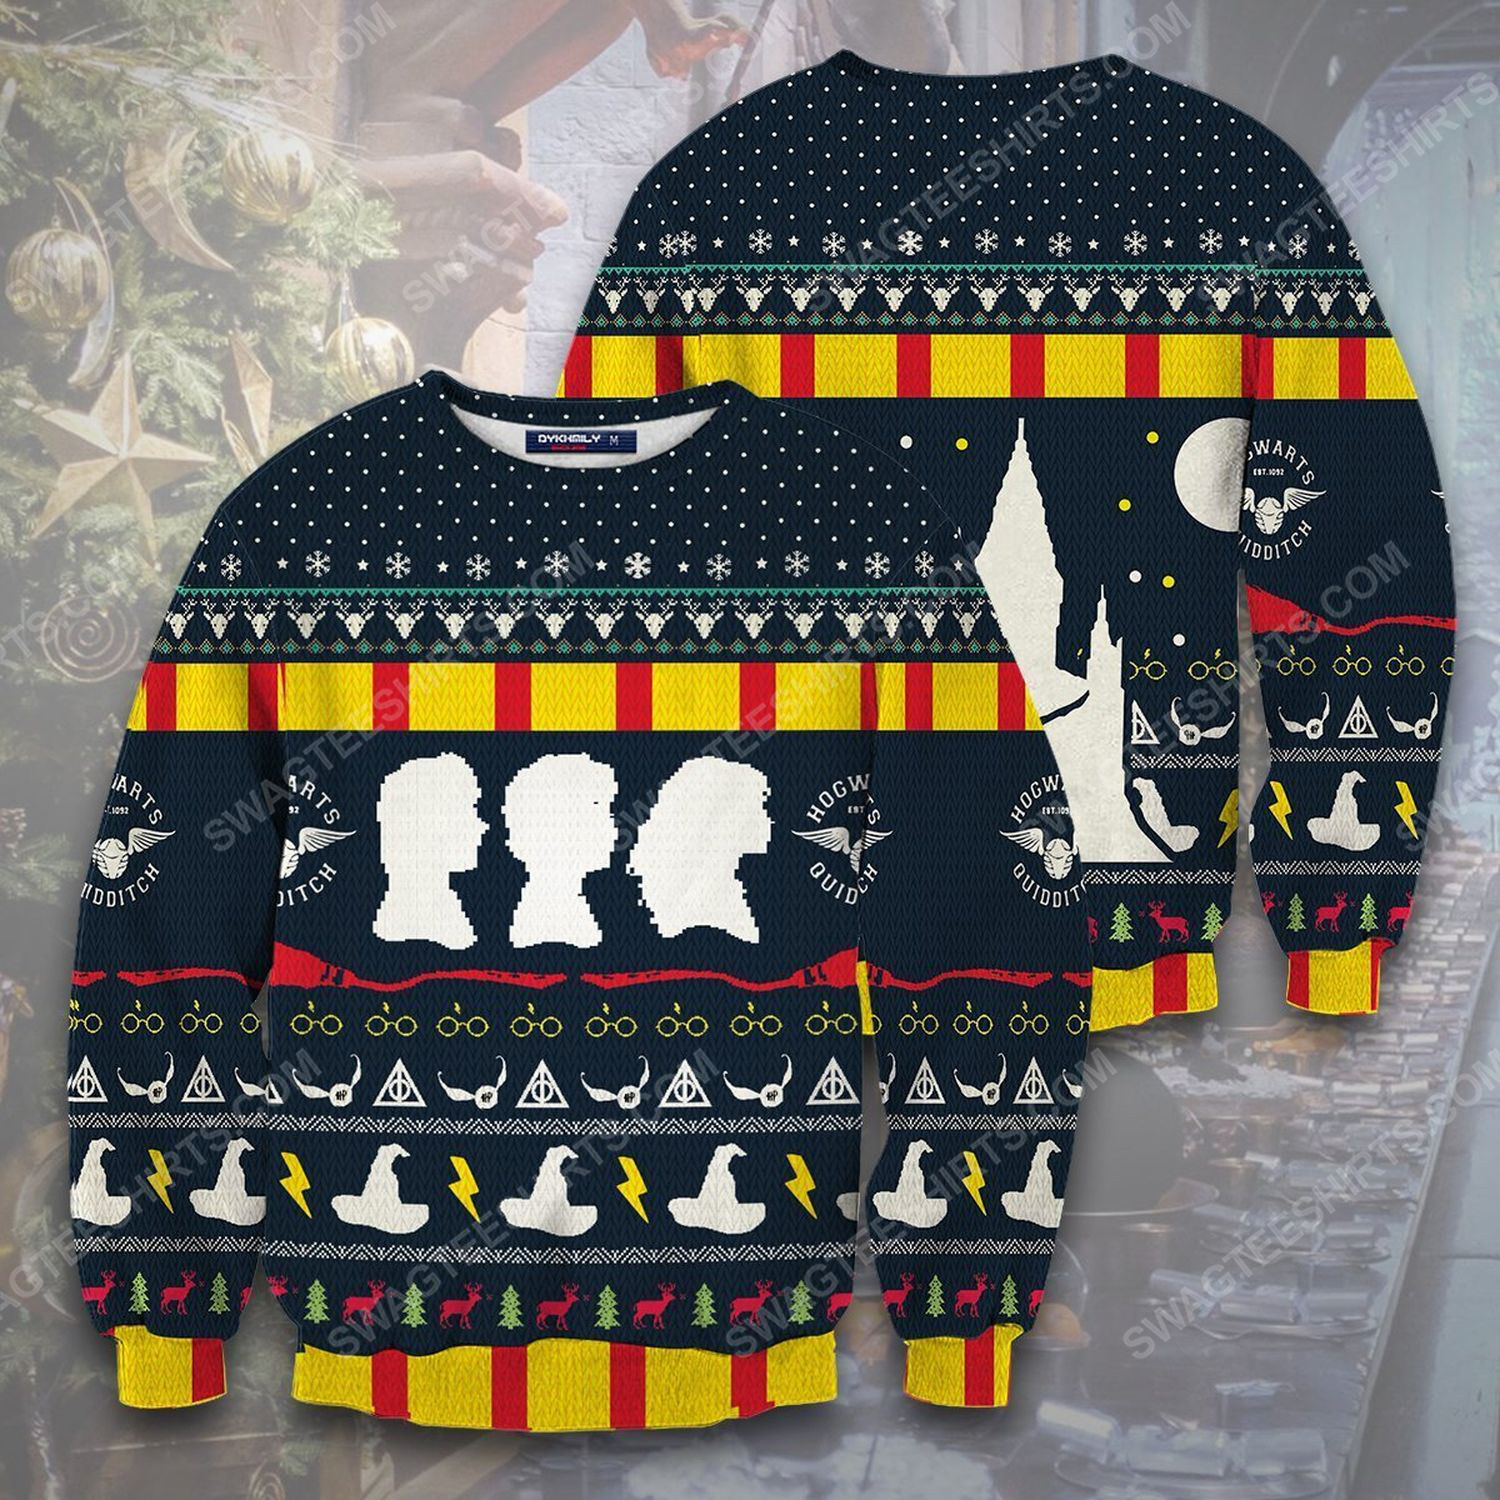 [special edition] Magical harry potter full print ugly christmas sweater – maria